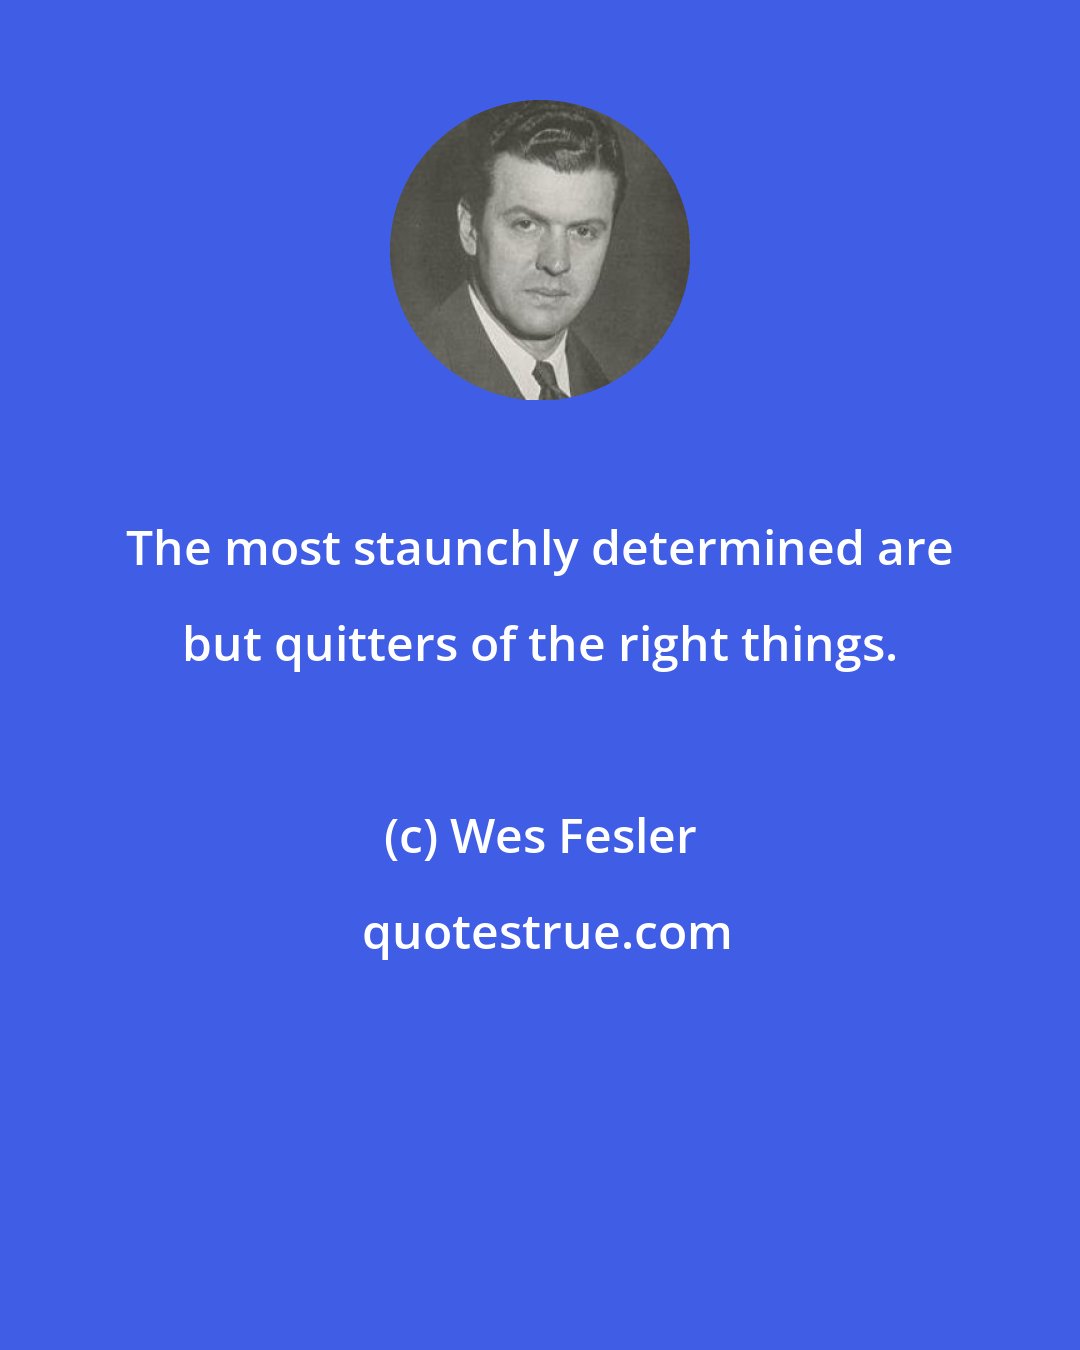 Wes Fesler: The most staunchly determined are but quitters of the right things.